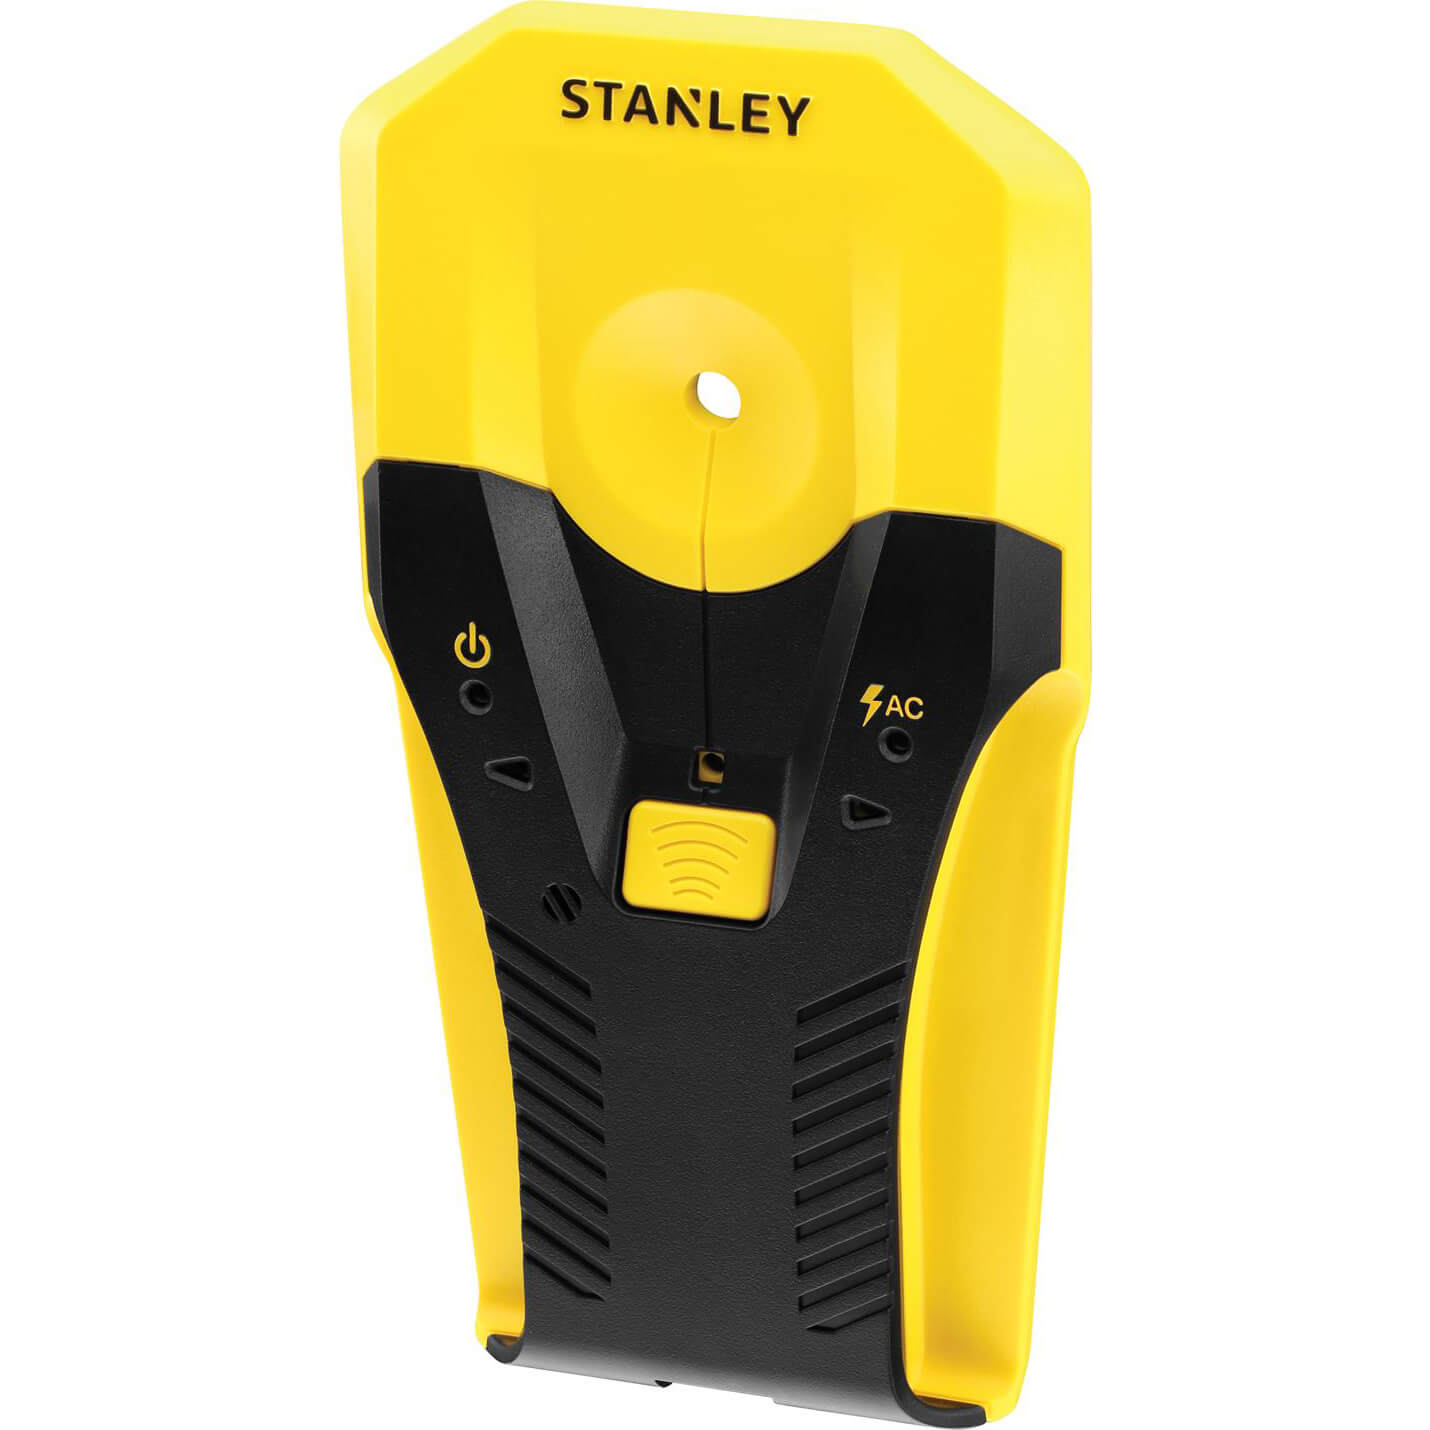 Stanley Intelli Tools S160 Wood and Metal Stud and Cable Sensor